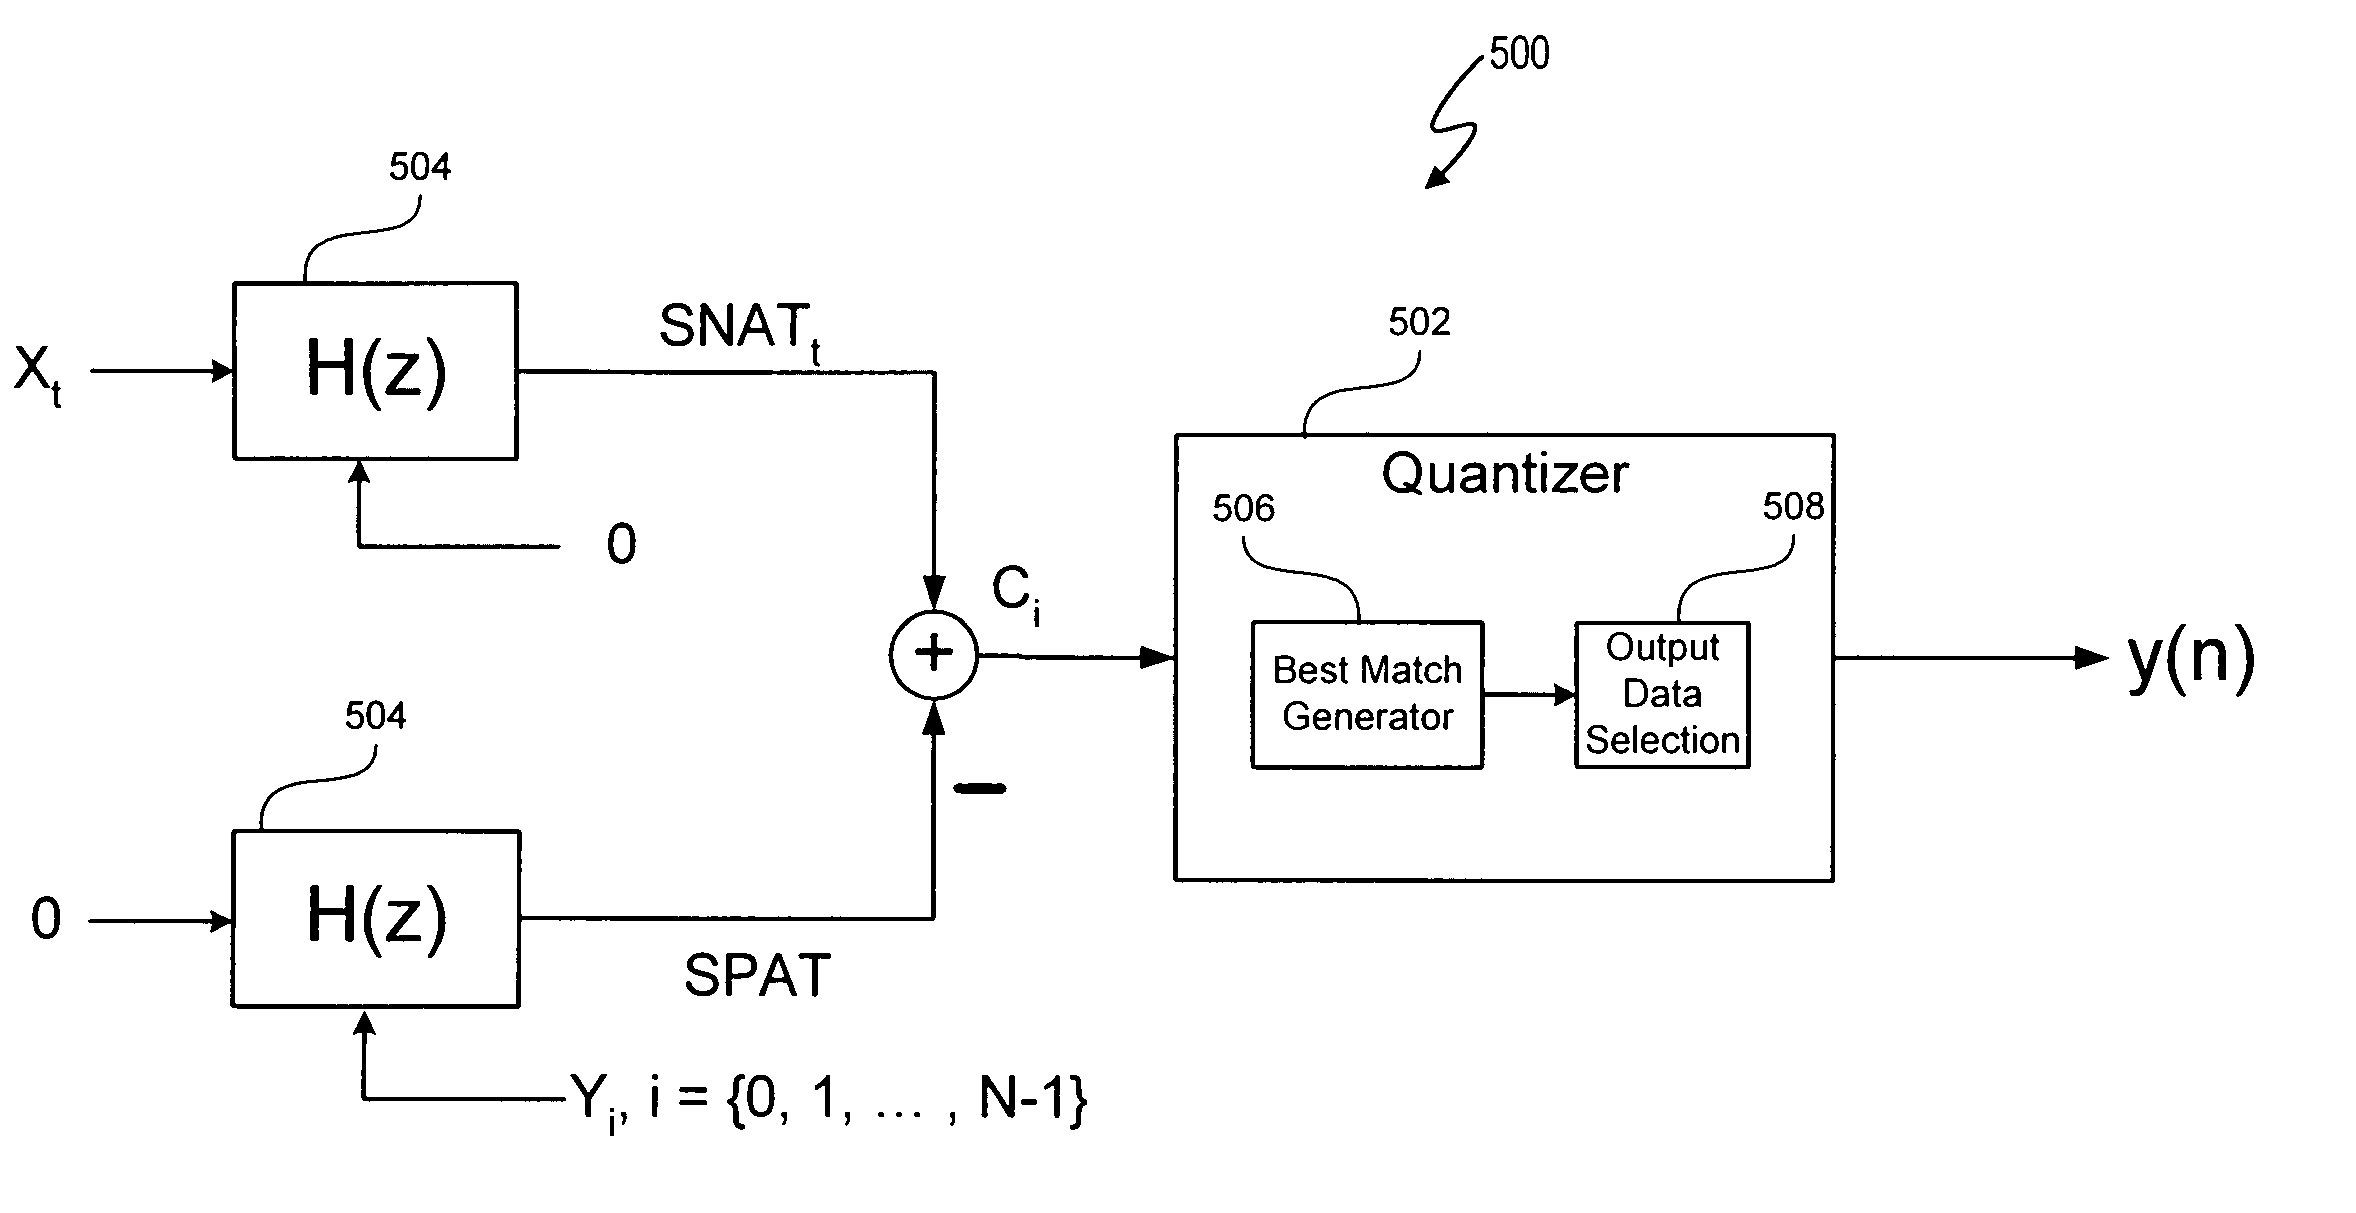 Look-ahead delta sigma modulator having an infinite impulse response filter with multiple look-ahead outputs